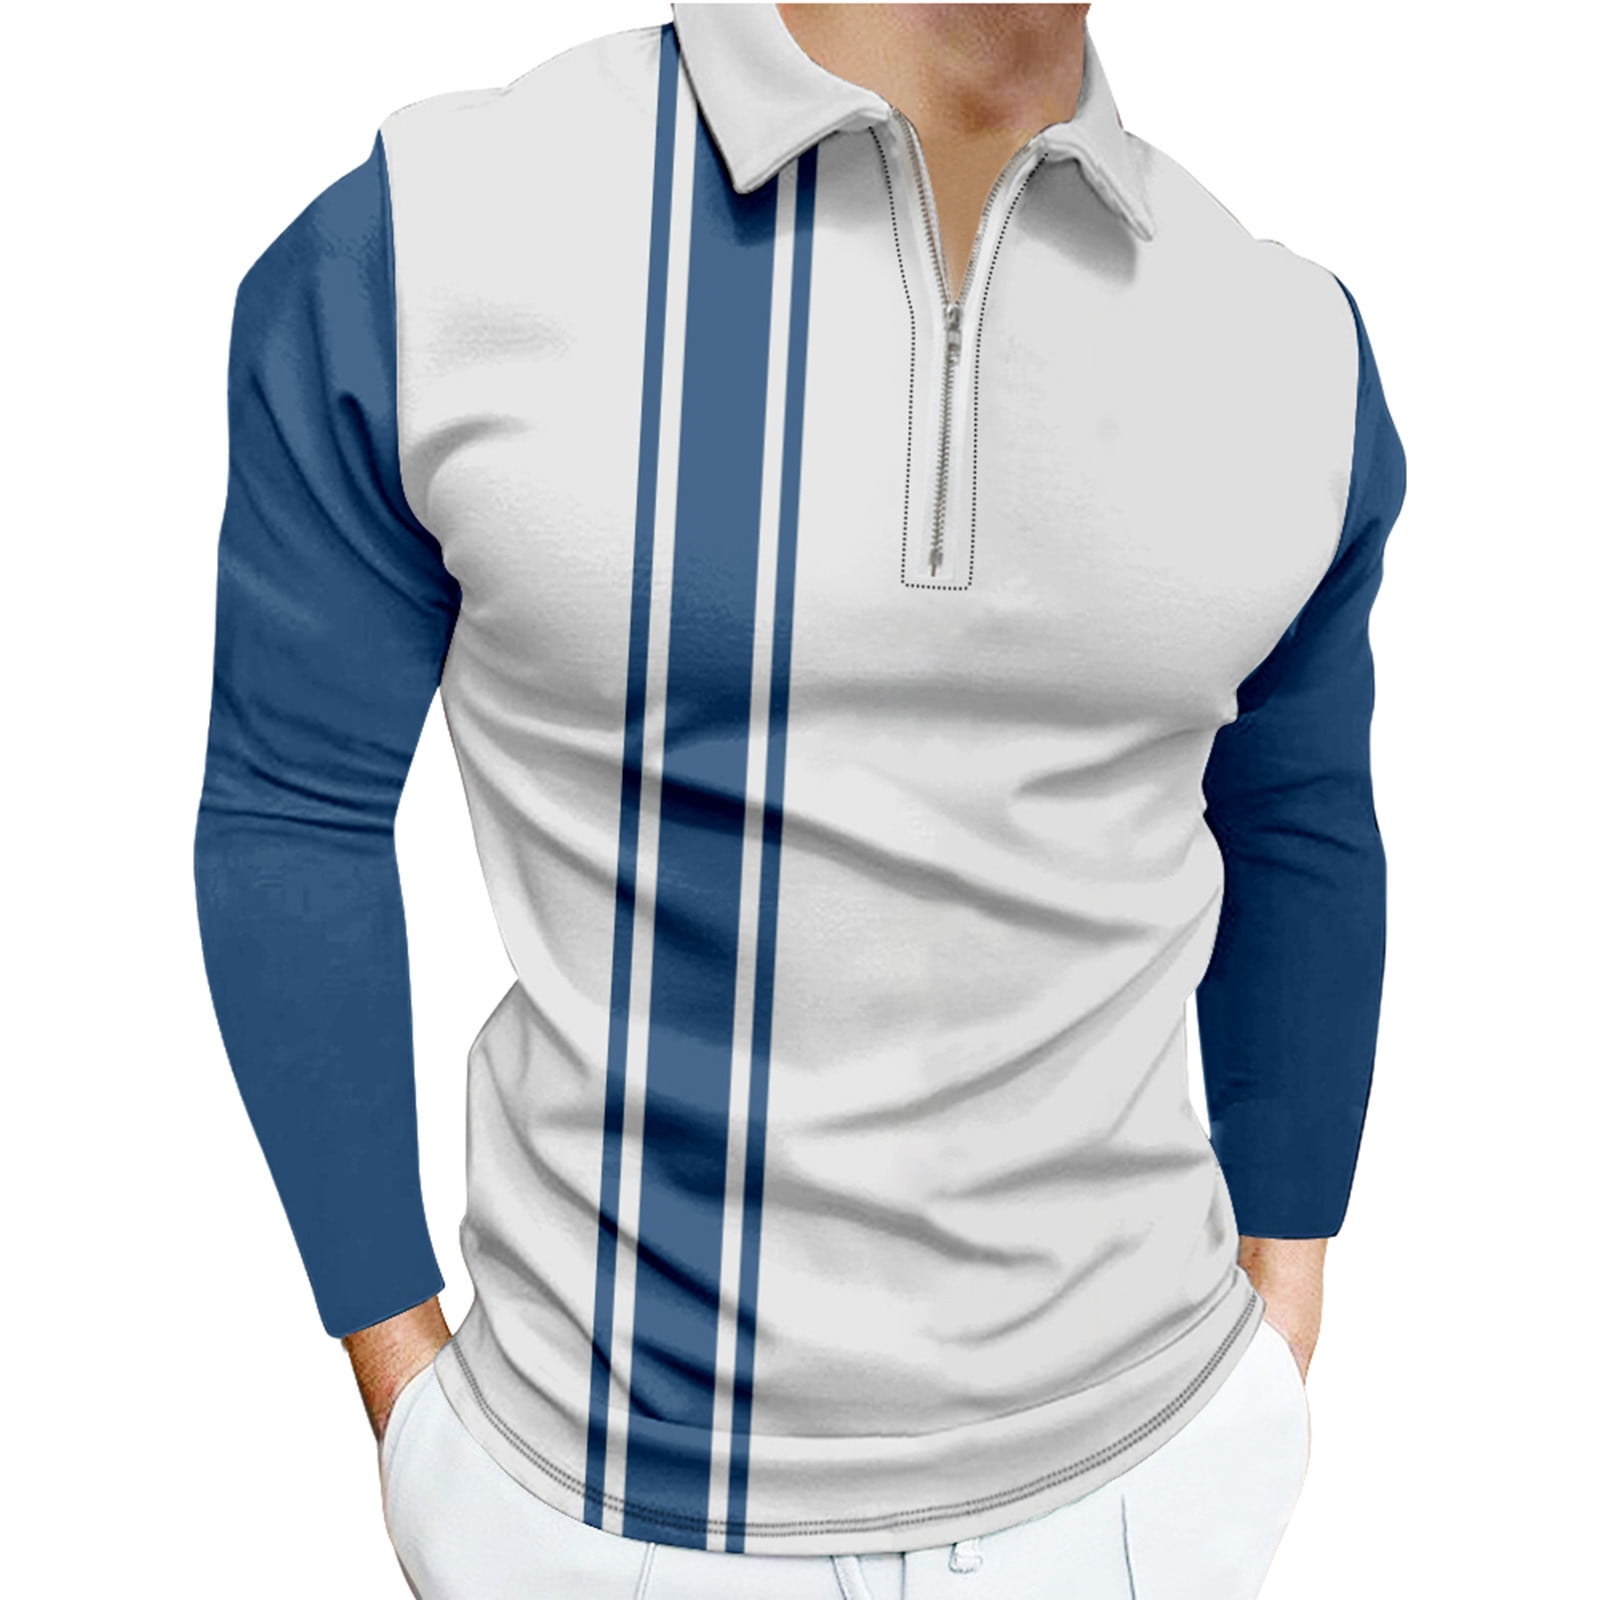 ZCFZJW Polo Shirts for Men Casual Summer Long Sleeve Half Zip Up Striped  Collared T-Shirts Slim Fit Quick Dry Athletic Golf Shirts White XXXL